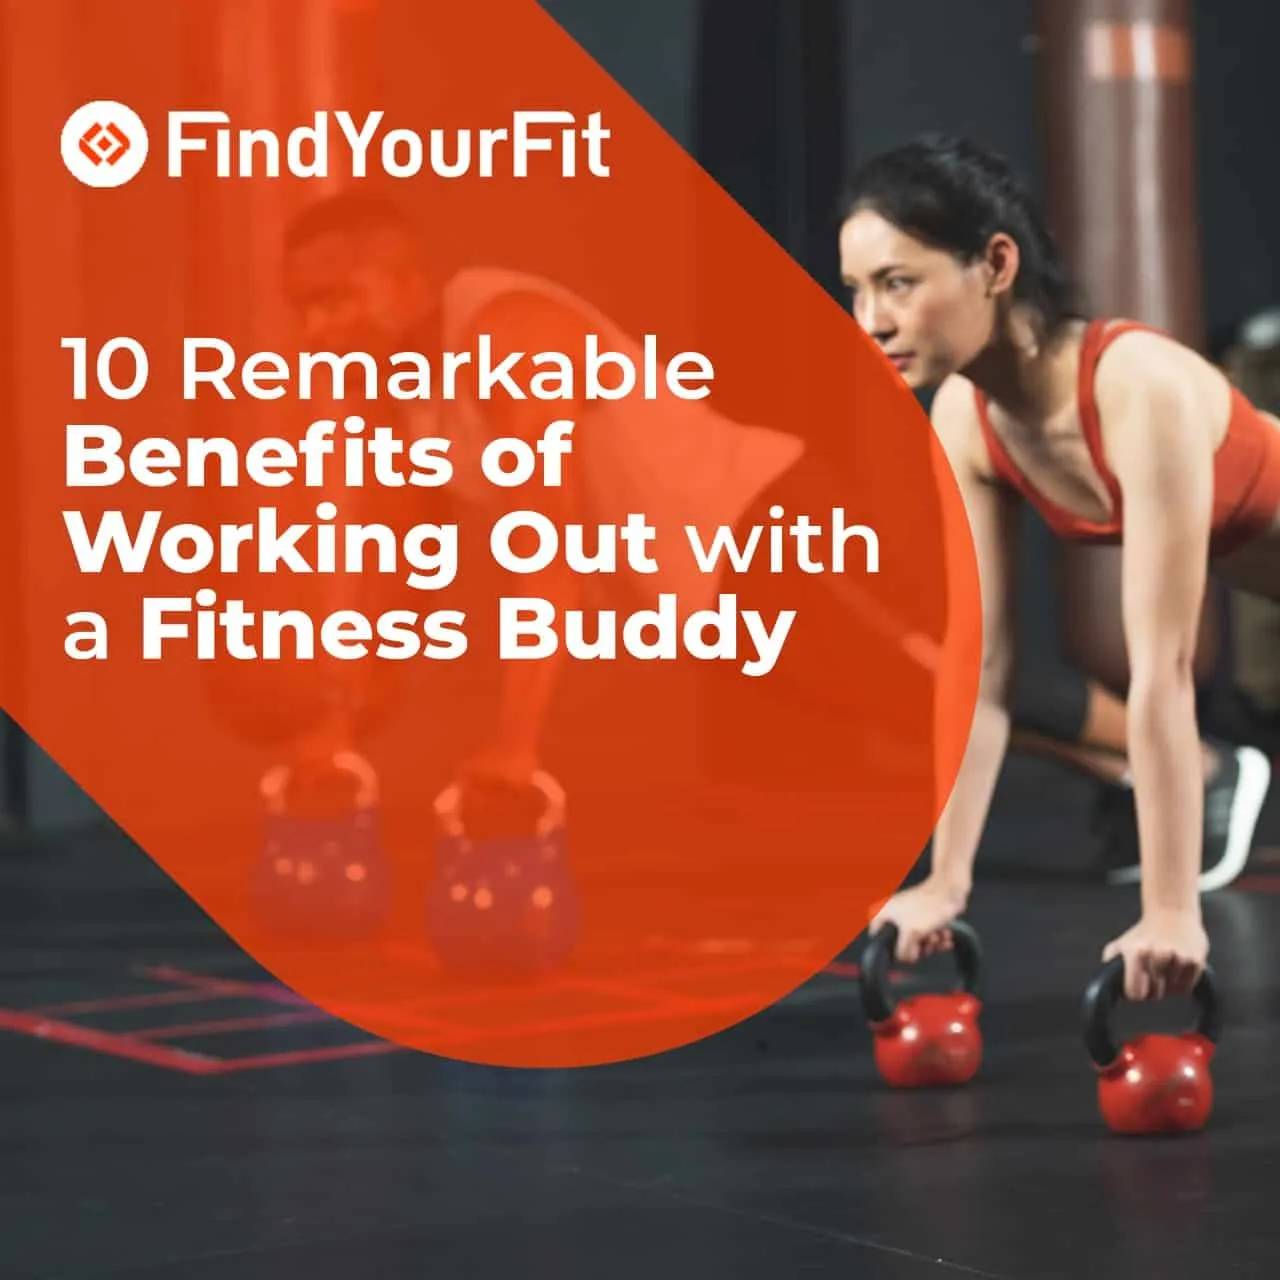 Benefits of Working Out With a Fitness Buddy